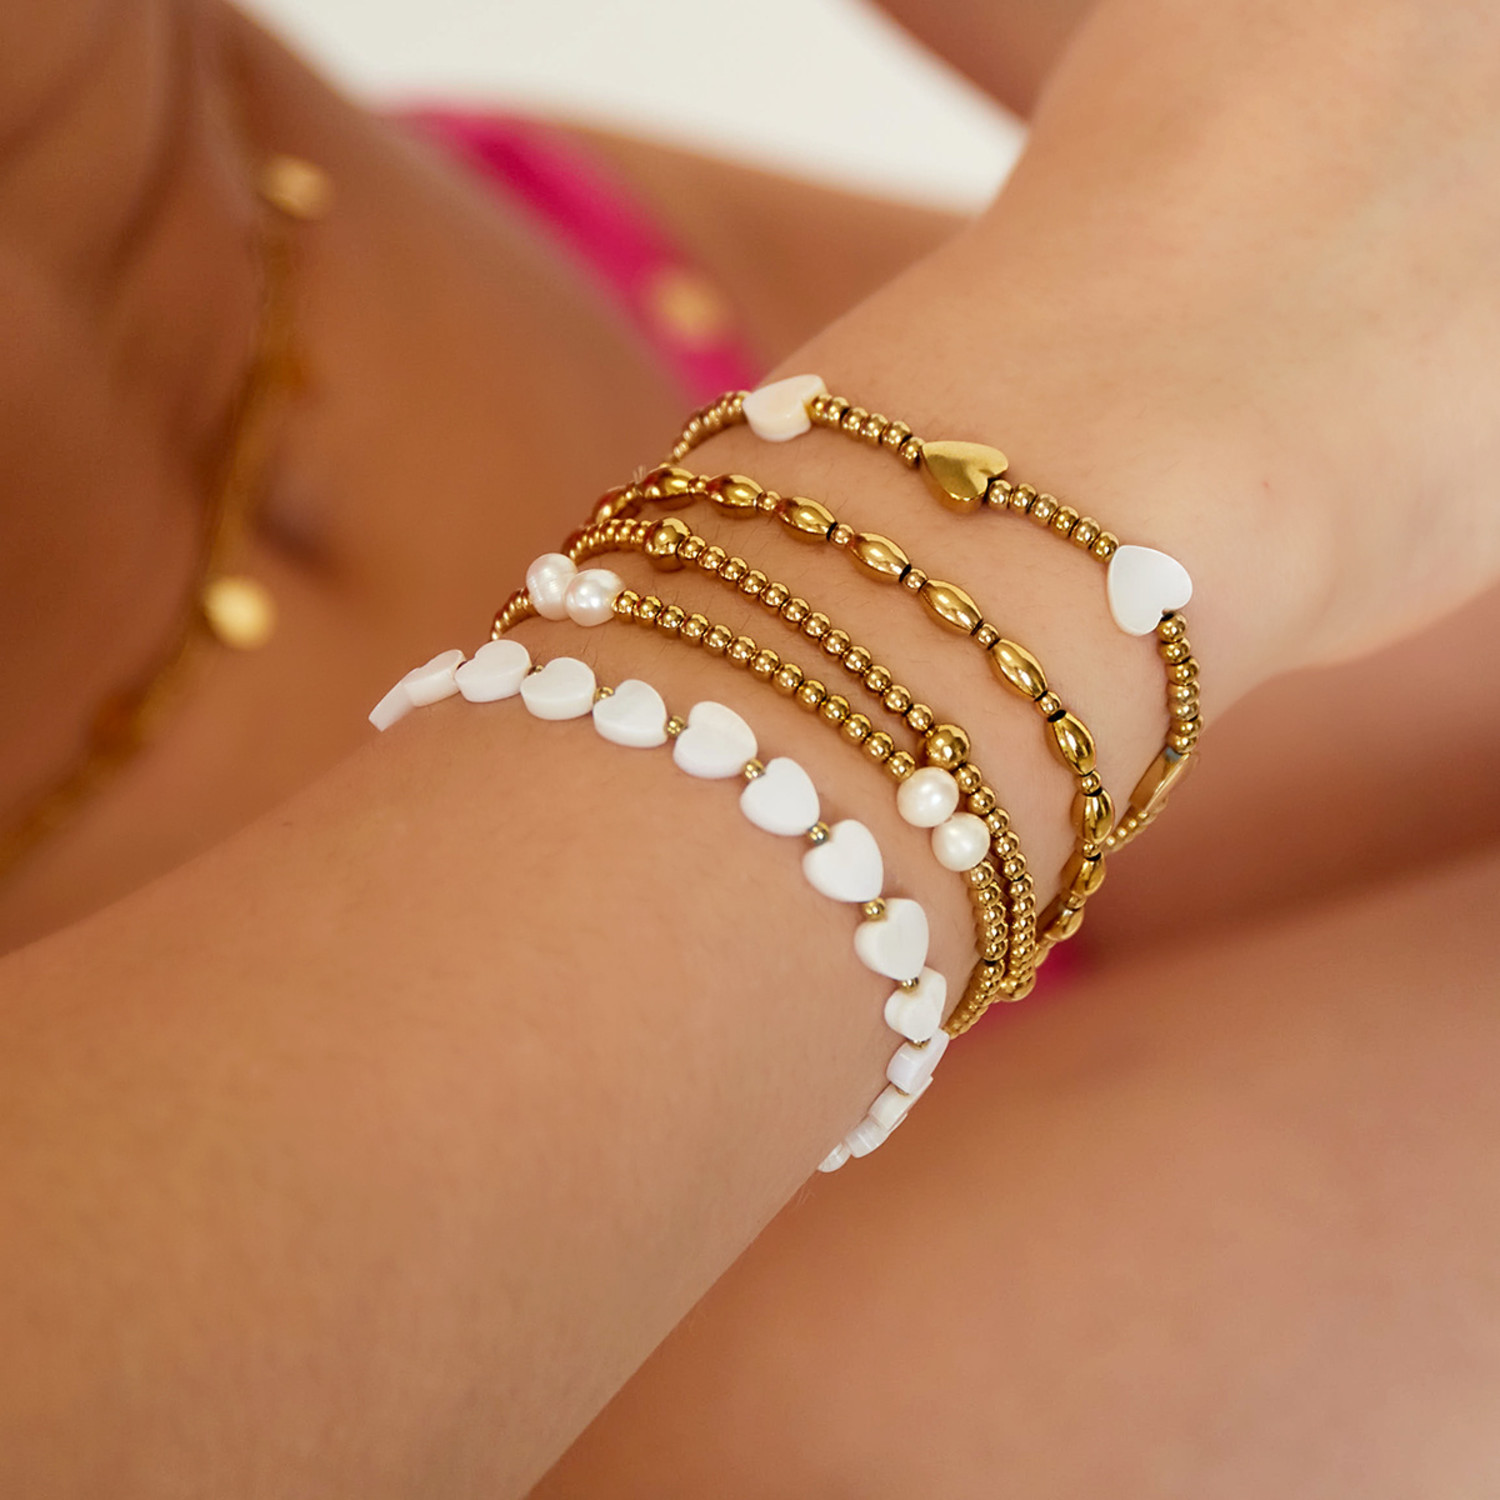 Gold Cowrie Oyster Shell Bracelet - Sparkle or Fade